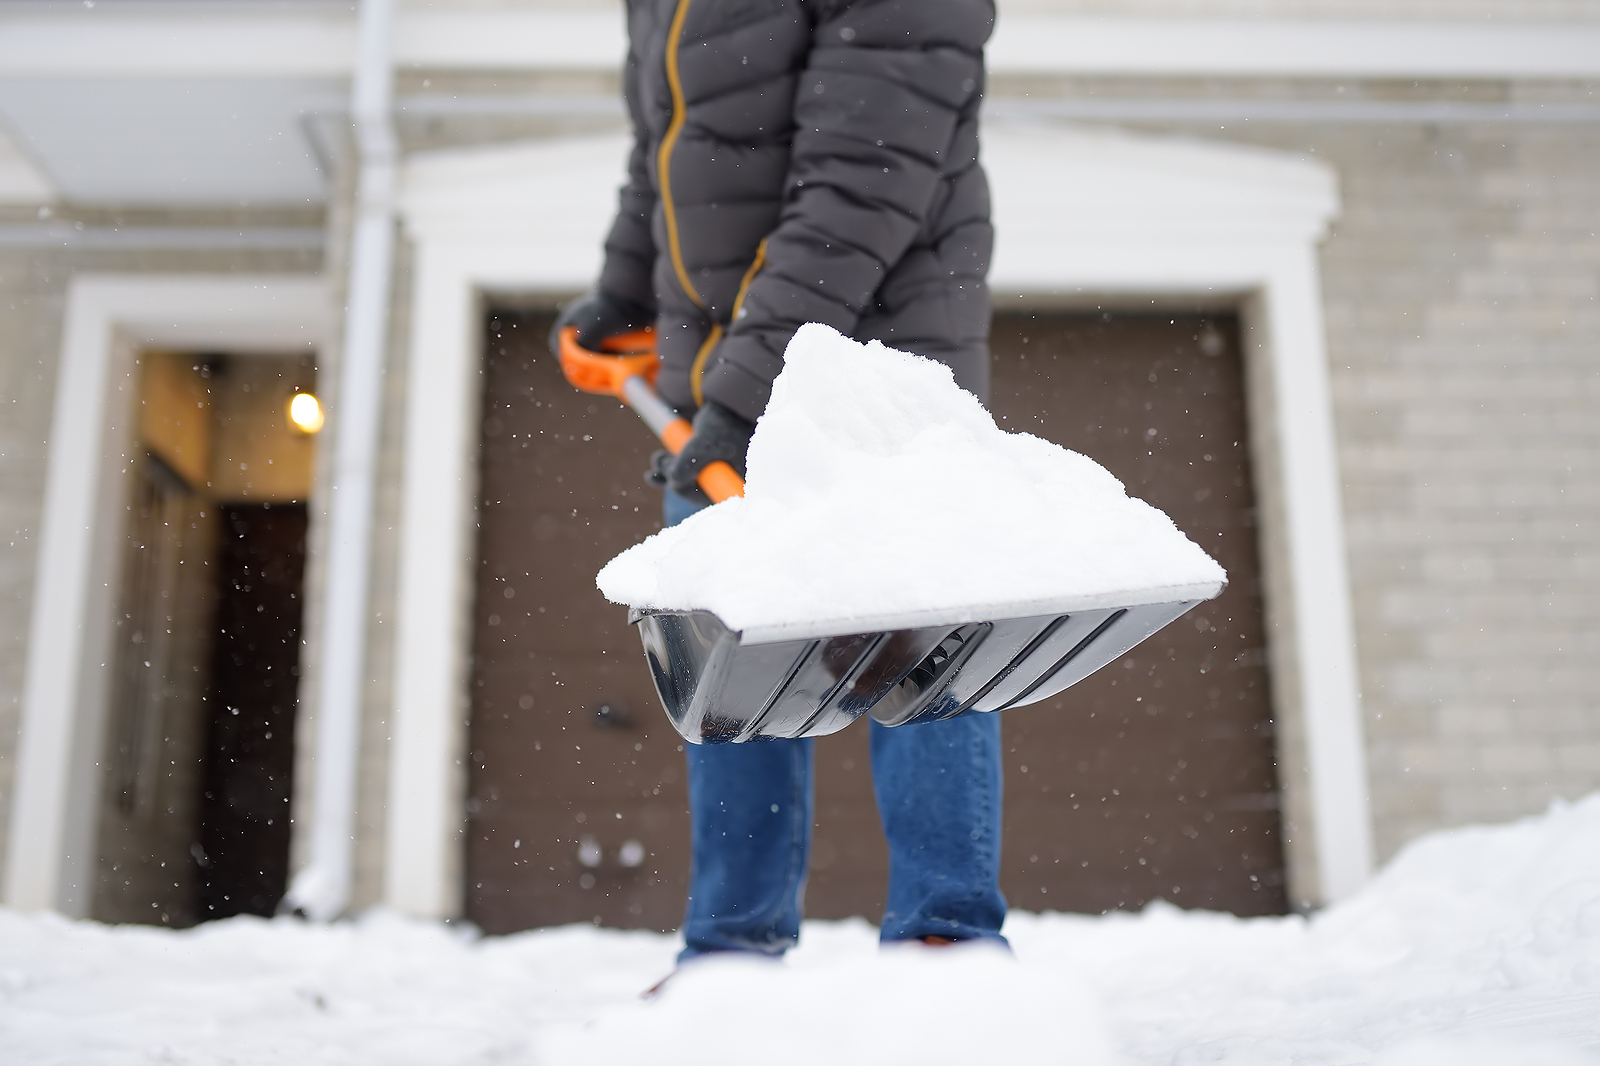 Big Rock Landscaping is getting into the top questions about how to get rid of ice quickly, our best snow removal tips, and even what not to do when you’re at the end of your snowfall rope. Spoiler: That last one may or may not involve a flamethrower.